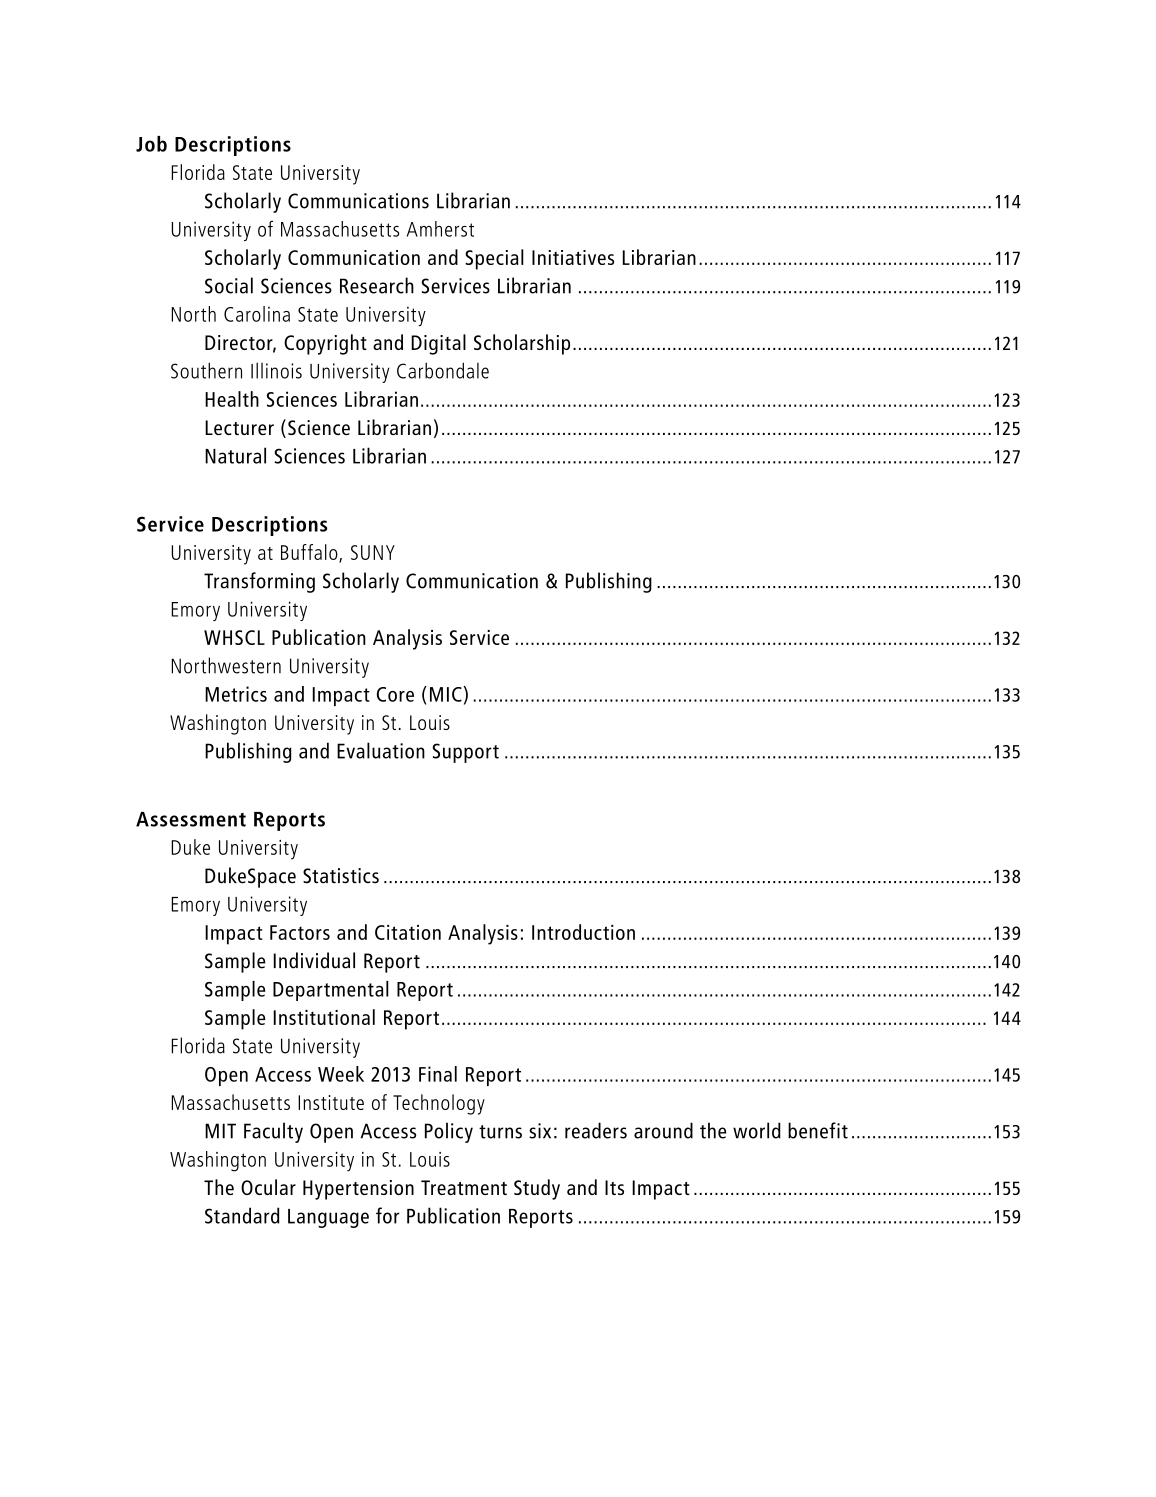 SPEC Kit 346: Scholarly Output Assessment Activities (May 2015) page 6